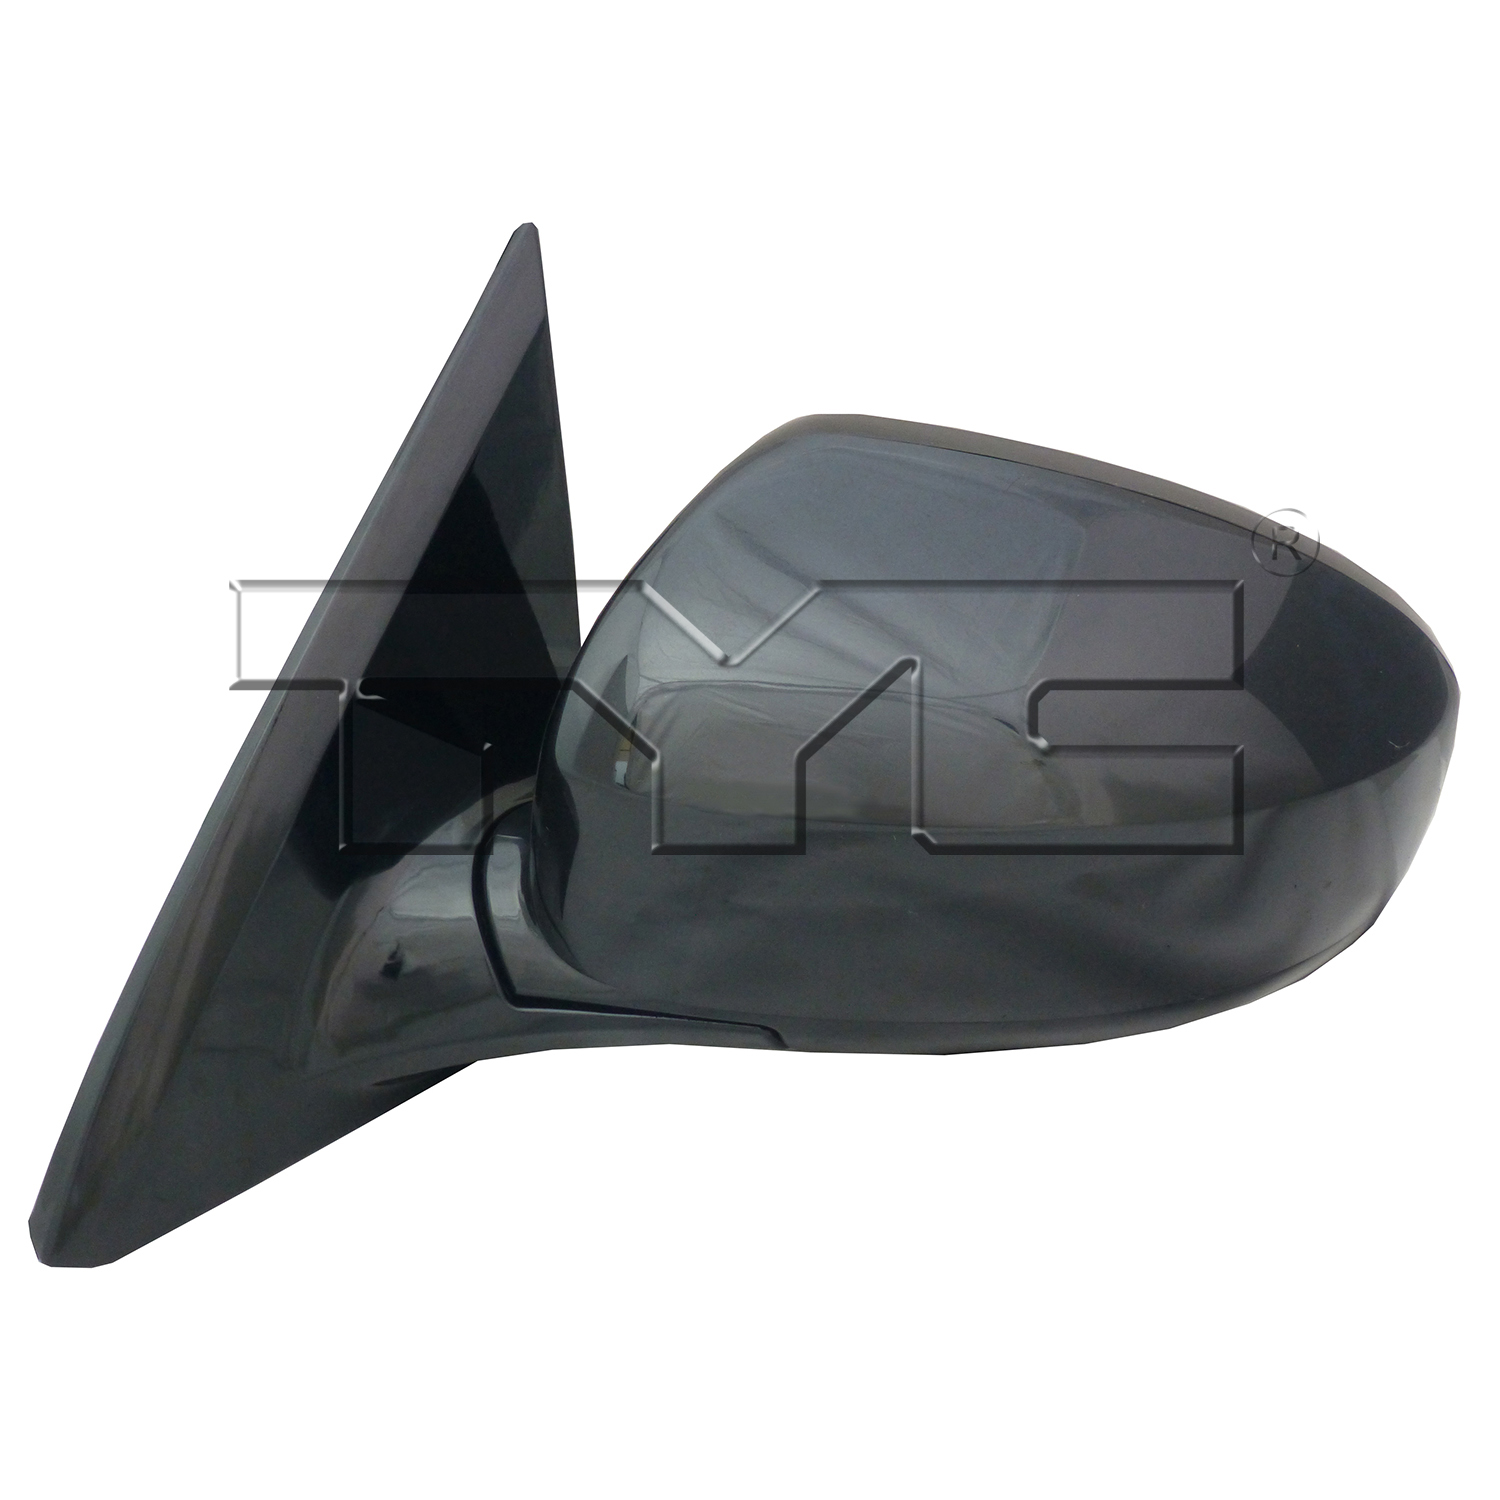 Aftermarket MIRRORS for NISSAN - PATHFINDER, PATHFINDER,13-16,LT Mirror outside rear view